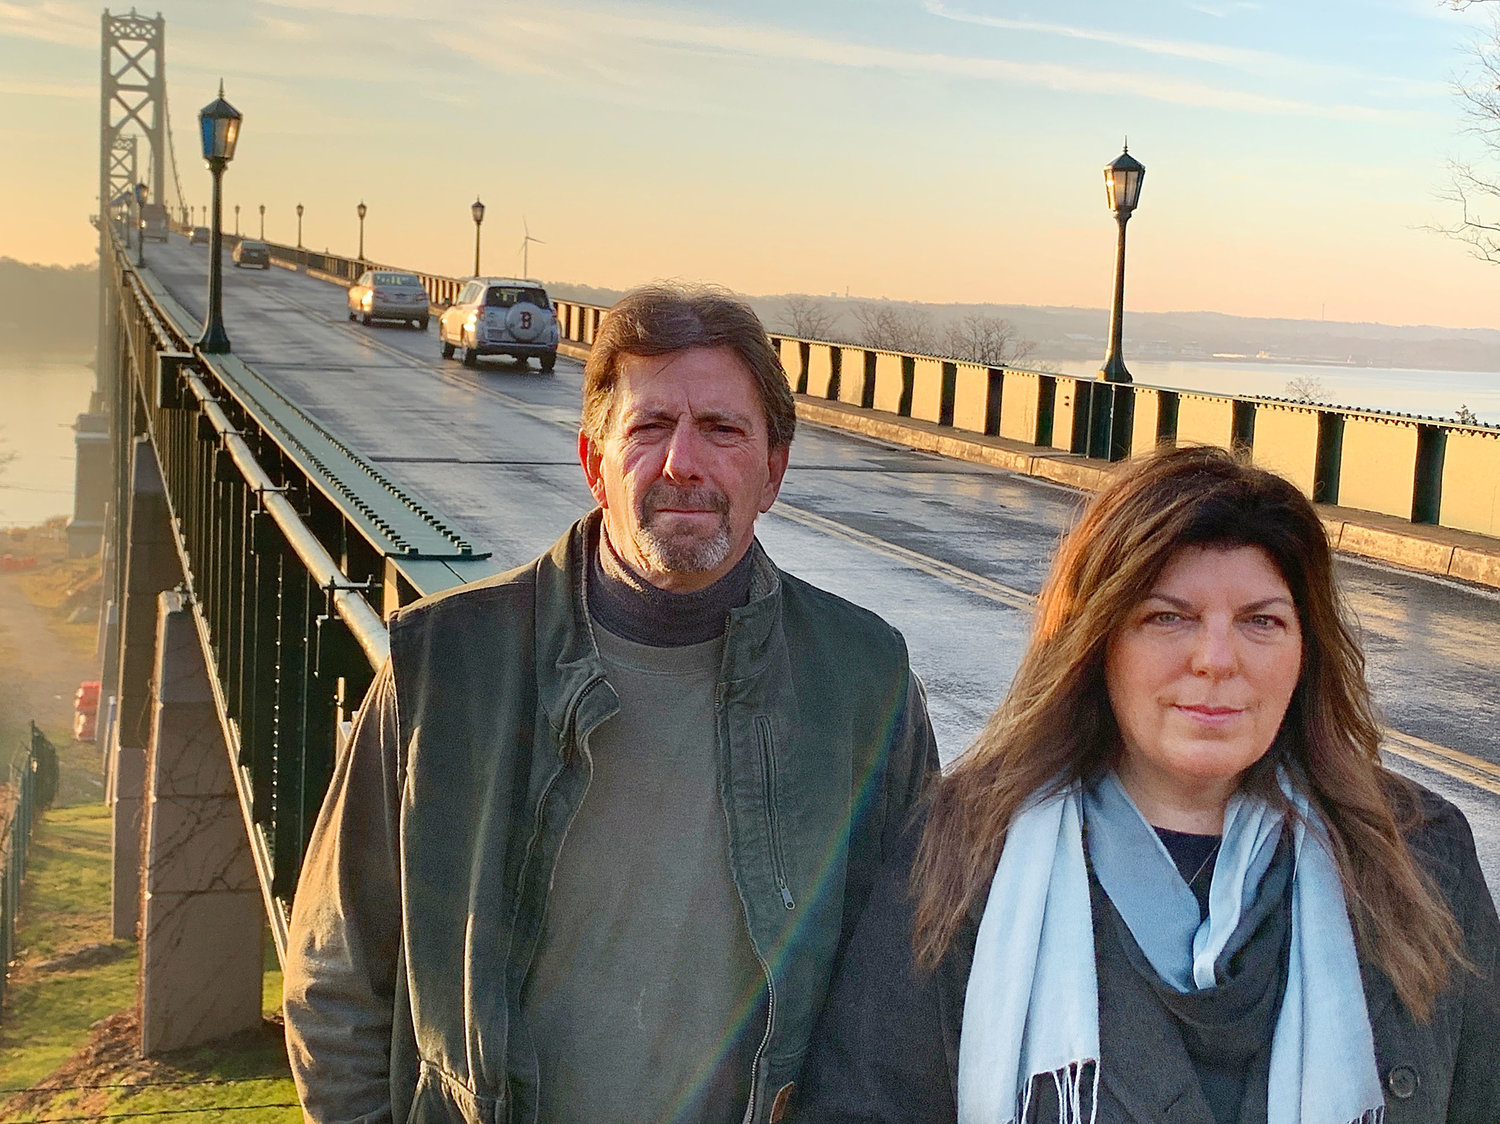 Brian Ganley (left) and Melissa Cotta both spoke to the Rhode Island Turnpike and Bridge Authority board of directors on Wednesday morning, urging them to investigate how to install suicide prevention barriers on the state's tall bridges.